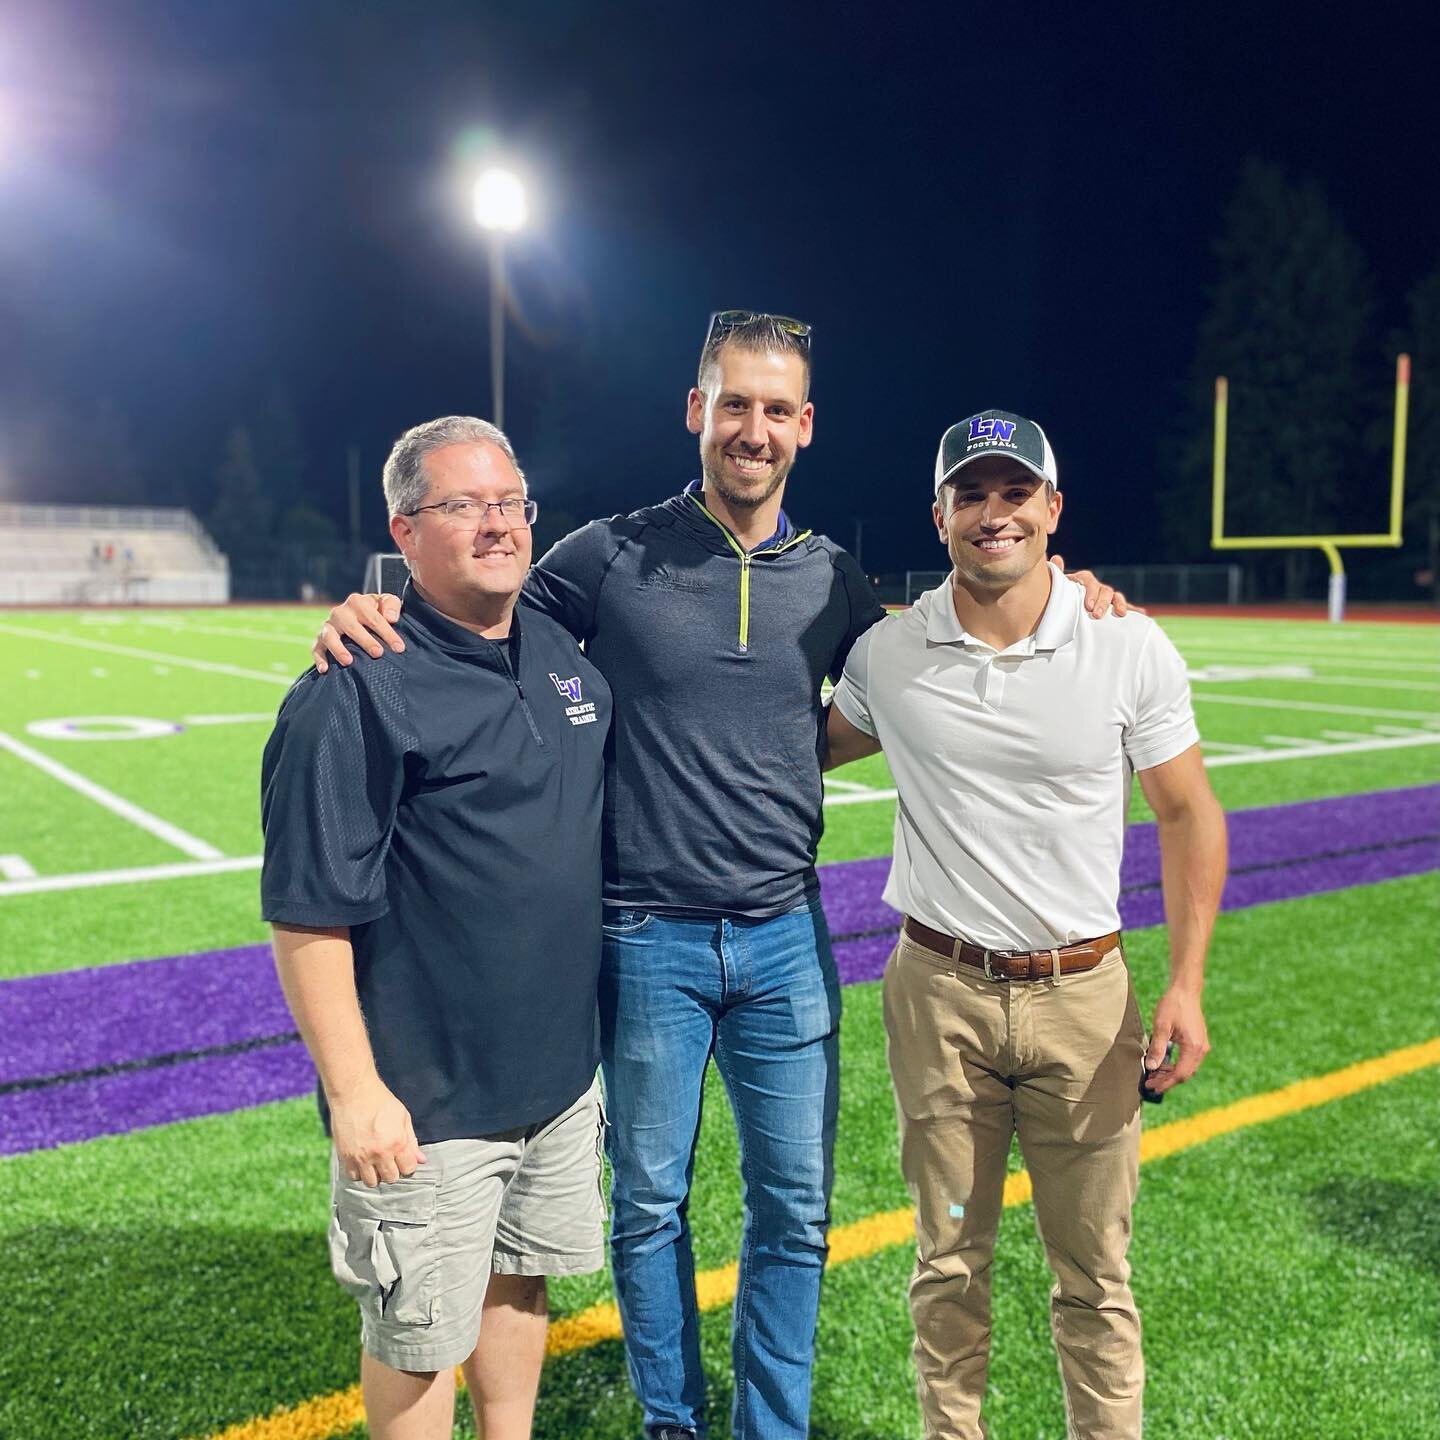 Delaney, Victor, and Dr. Manning covering LWHS football game Friday. Our clinicians were all over the Puget Sound area covering HS sports this past weekend.
#fridaynightlights #highschoolfootball
@evergreenhealth